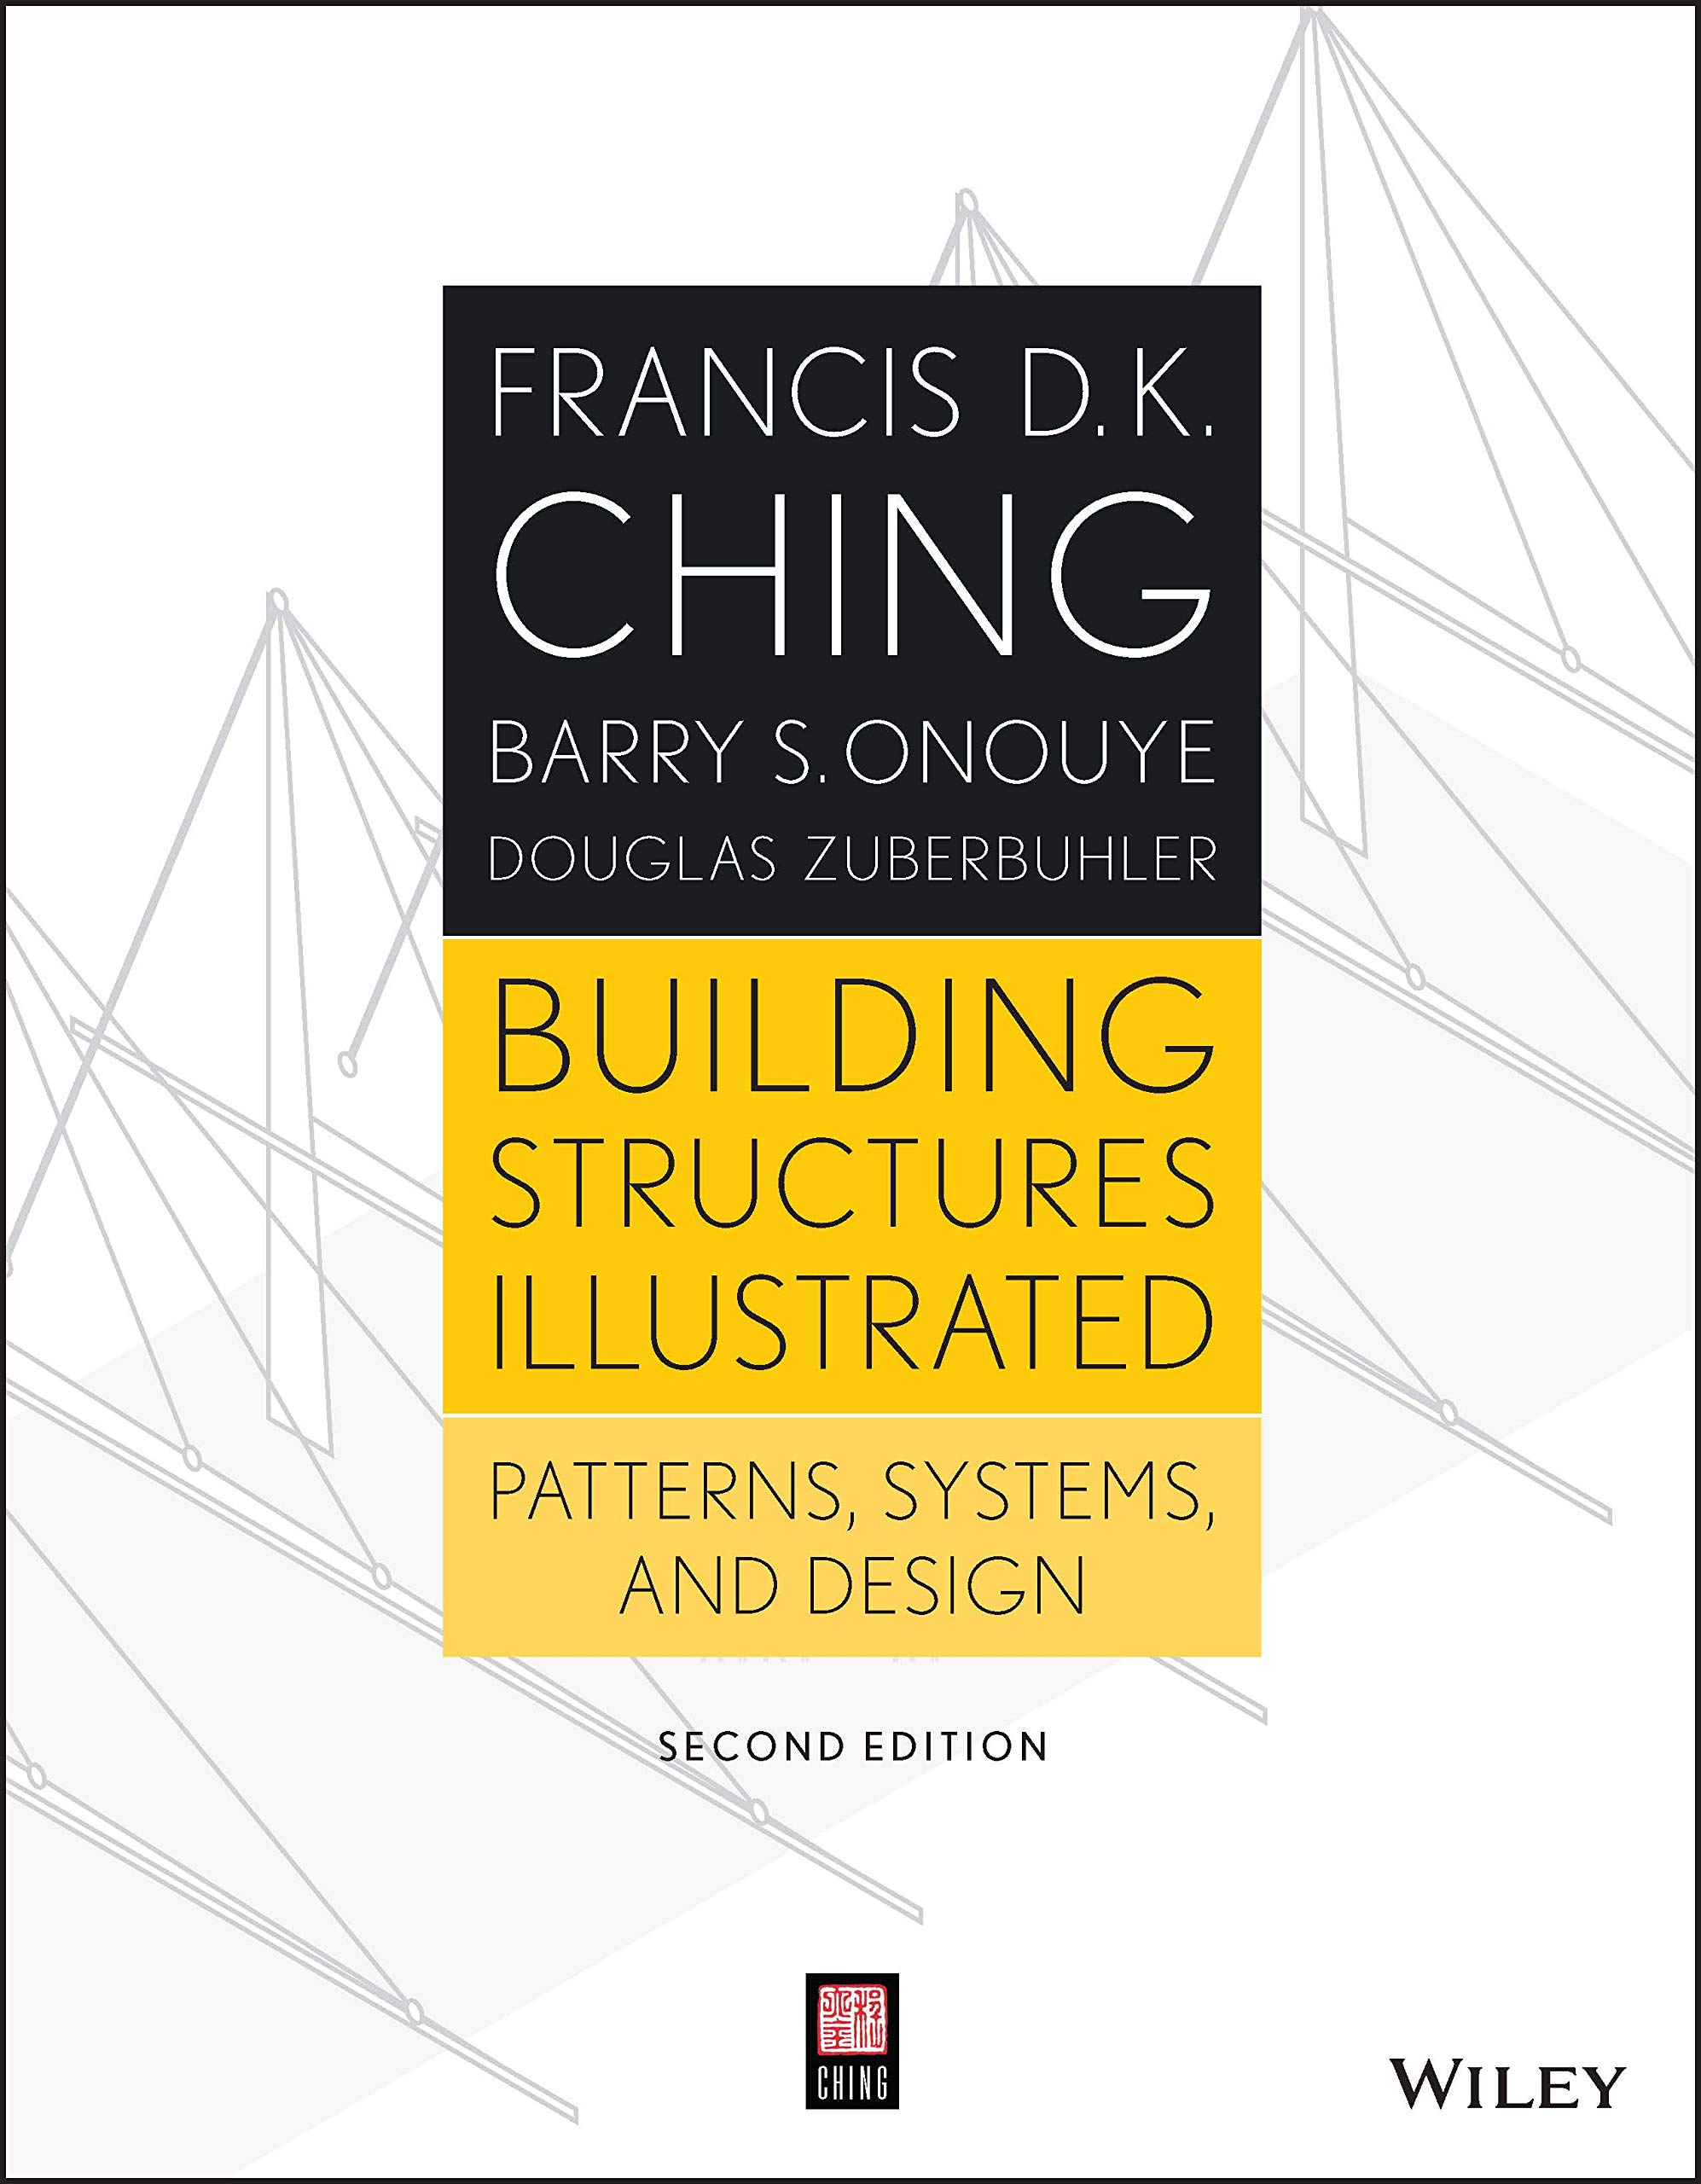 Building Structures Illustrated: Patterns, Systems, and Design